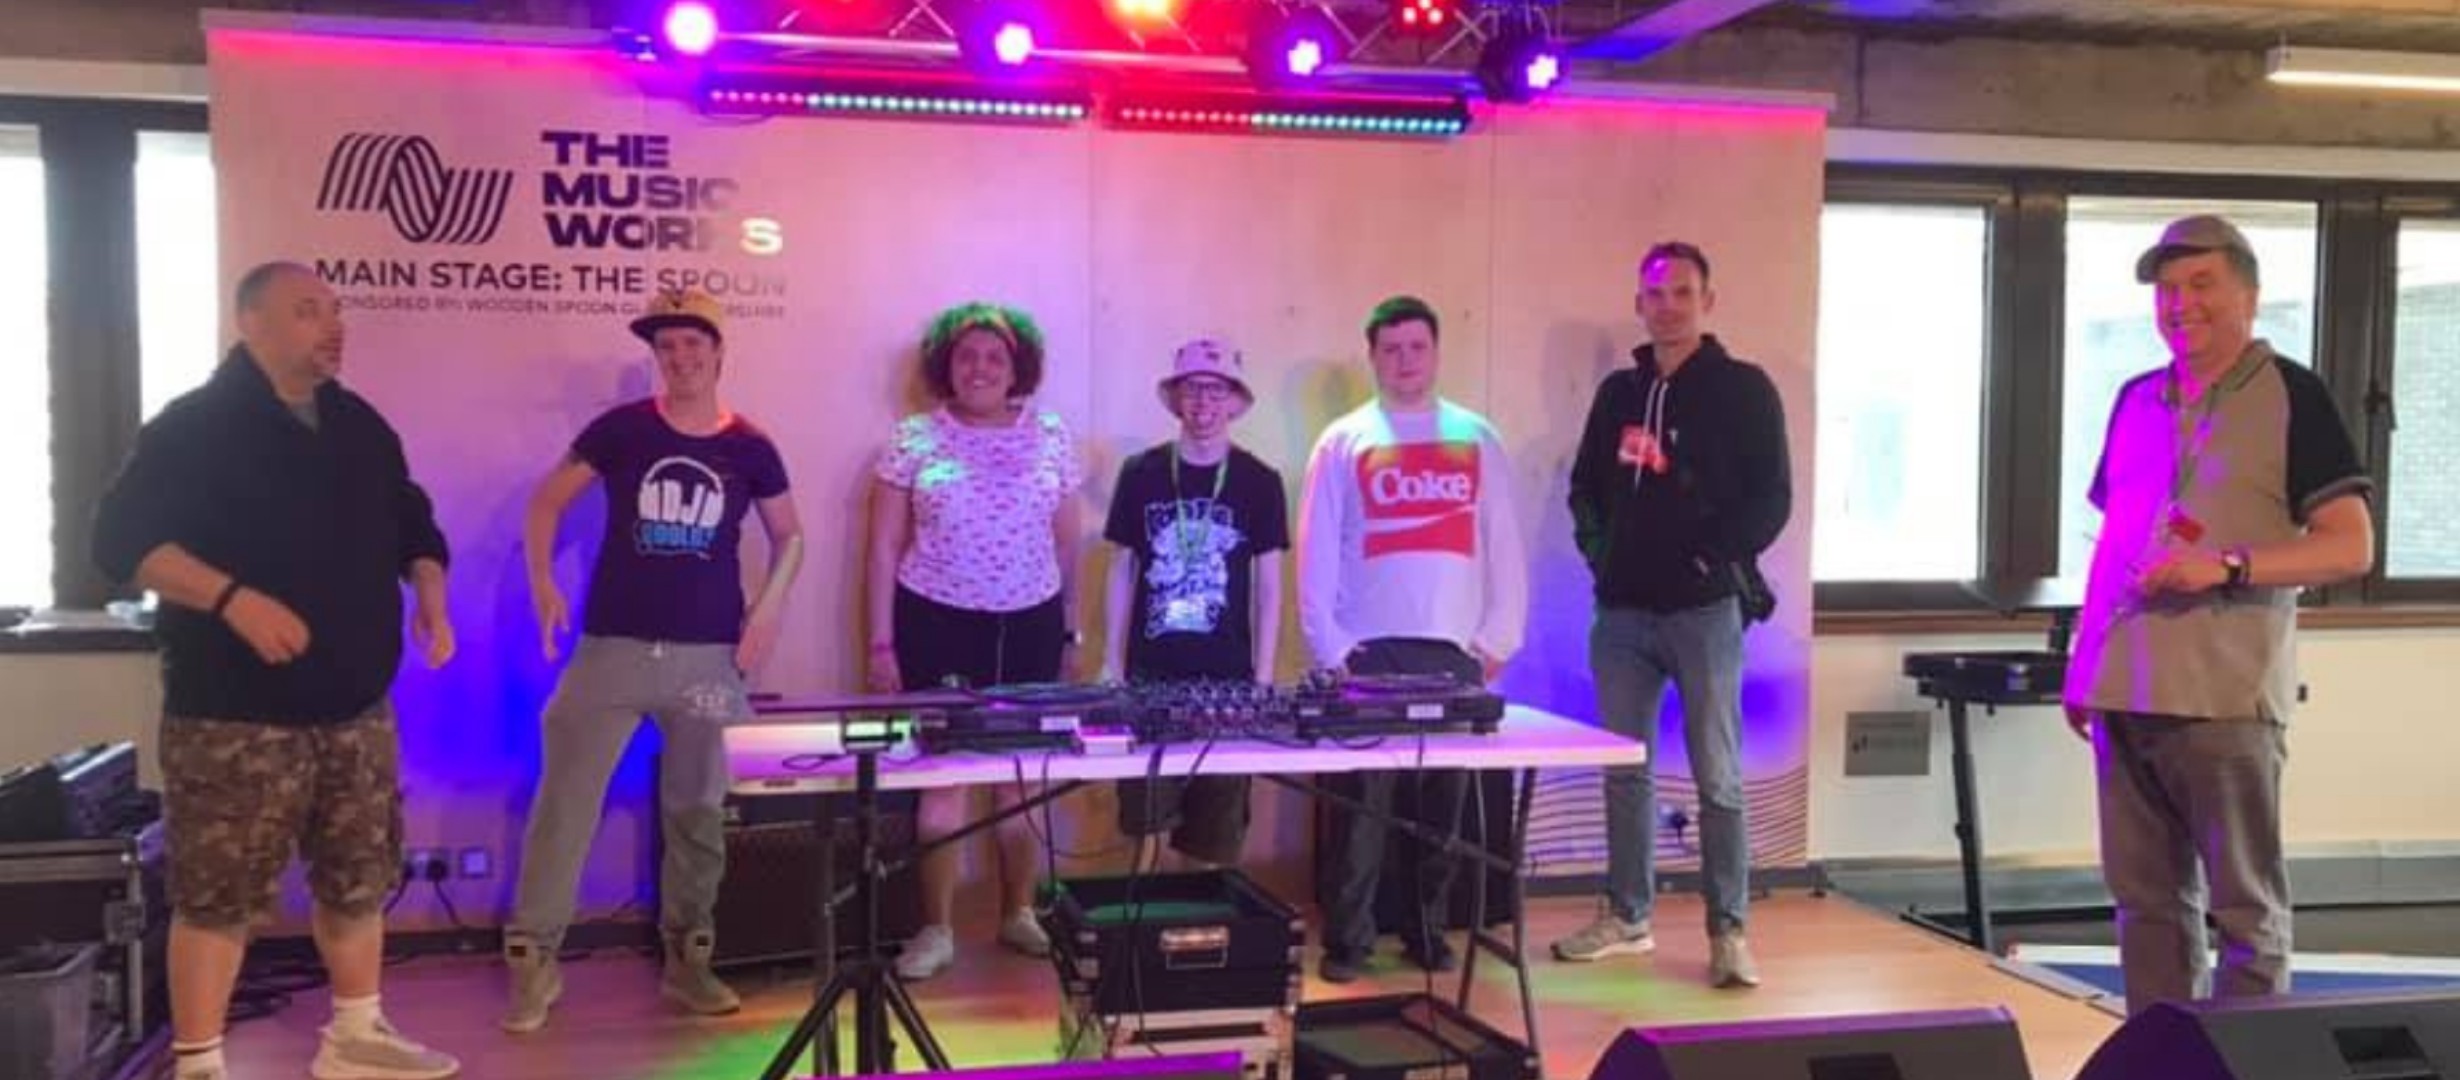 DJ Collective group photo on stage at The Music Works Hub in Gloucester 